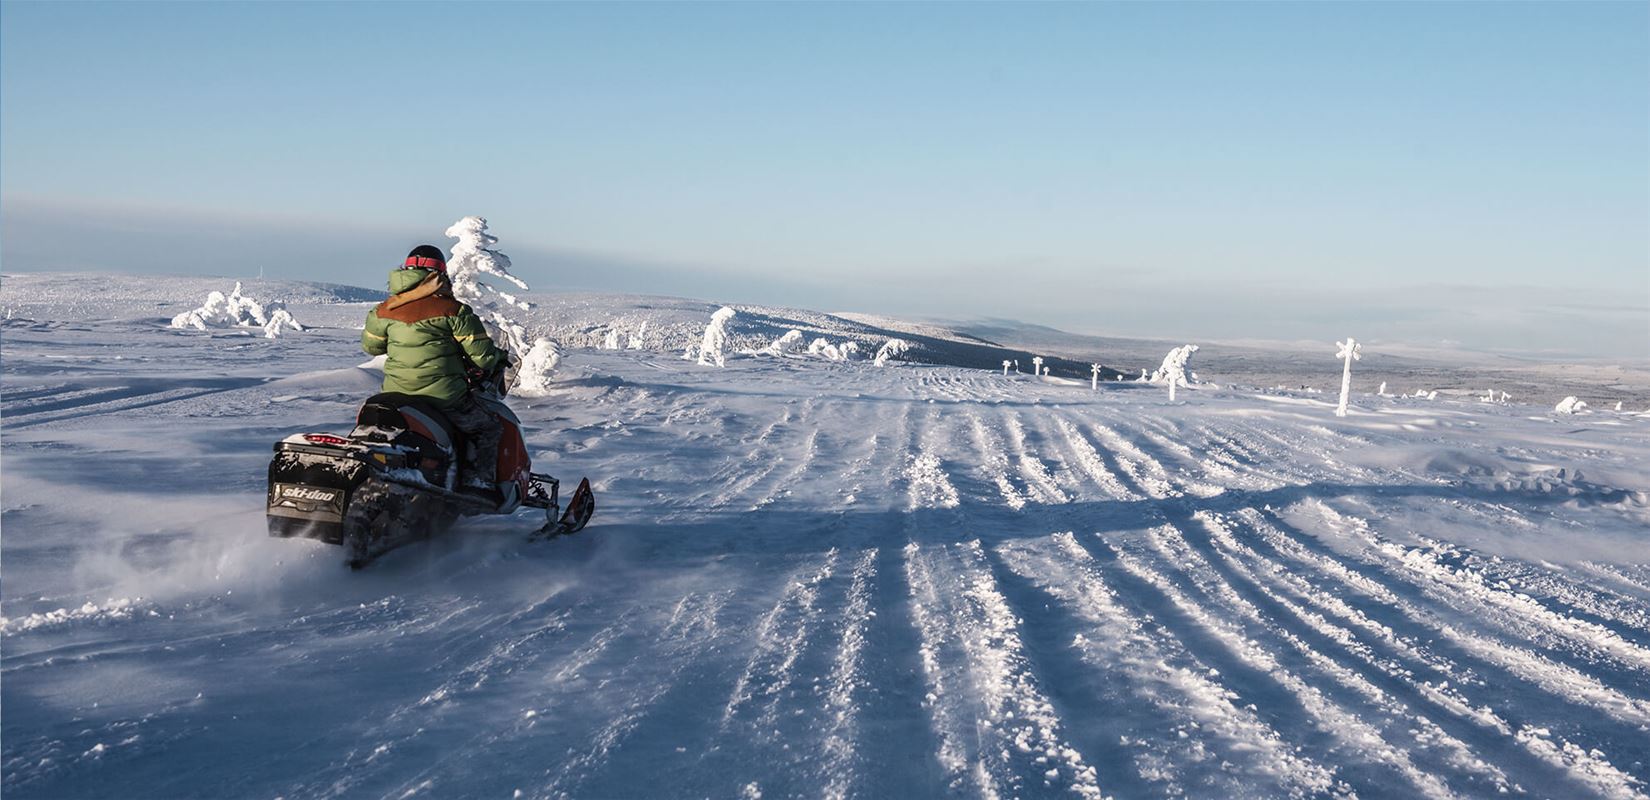 A driver on a scooter drives from the camera out onto the white expanses.